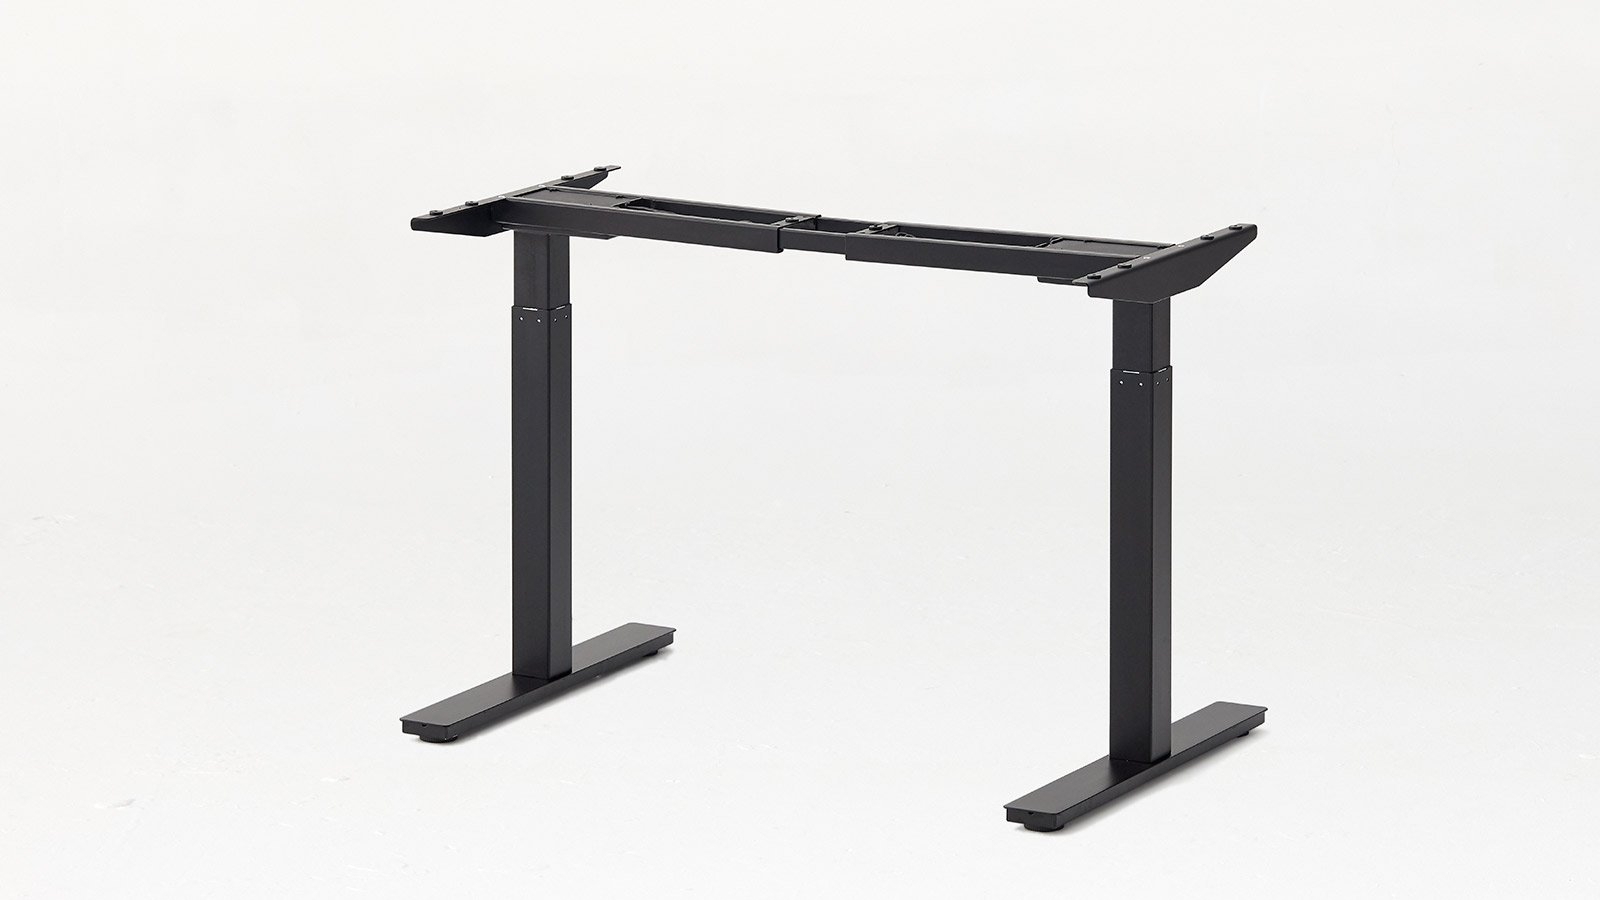 Product shot of the Autonomous SmartDesk Frame in black with the top exposed showing the mounting hole positions.